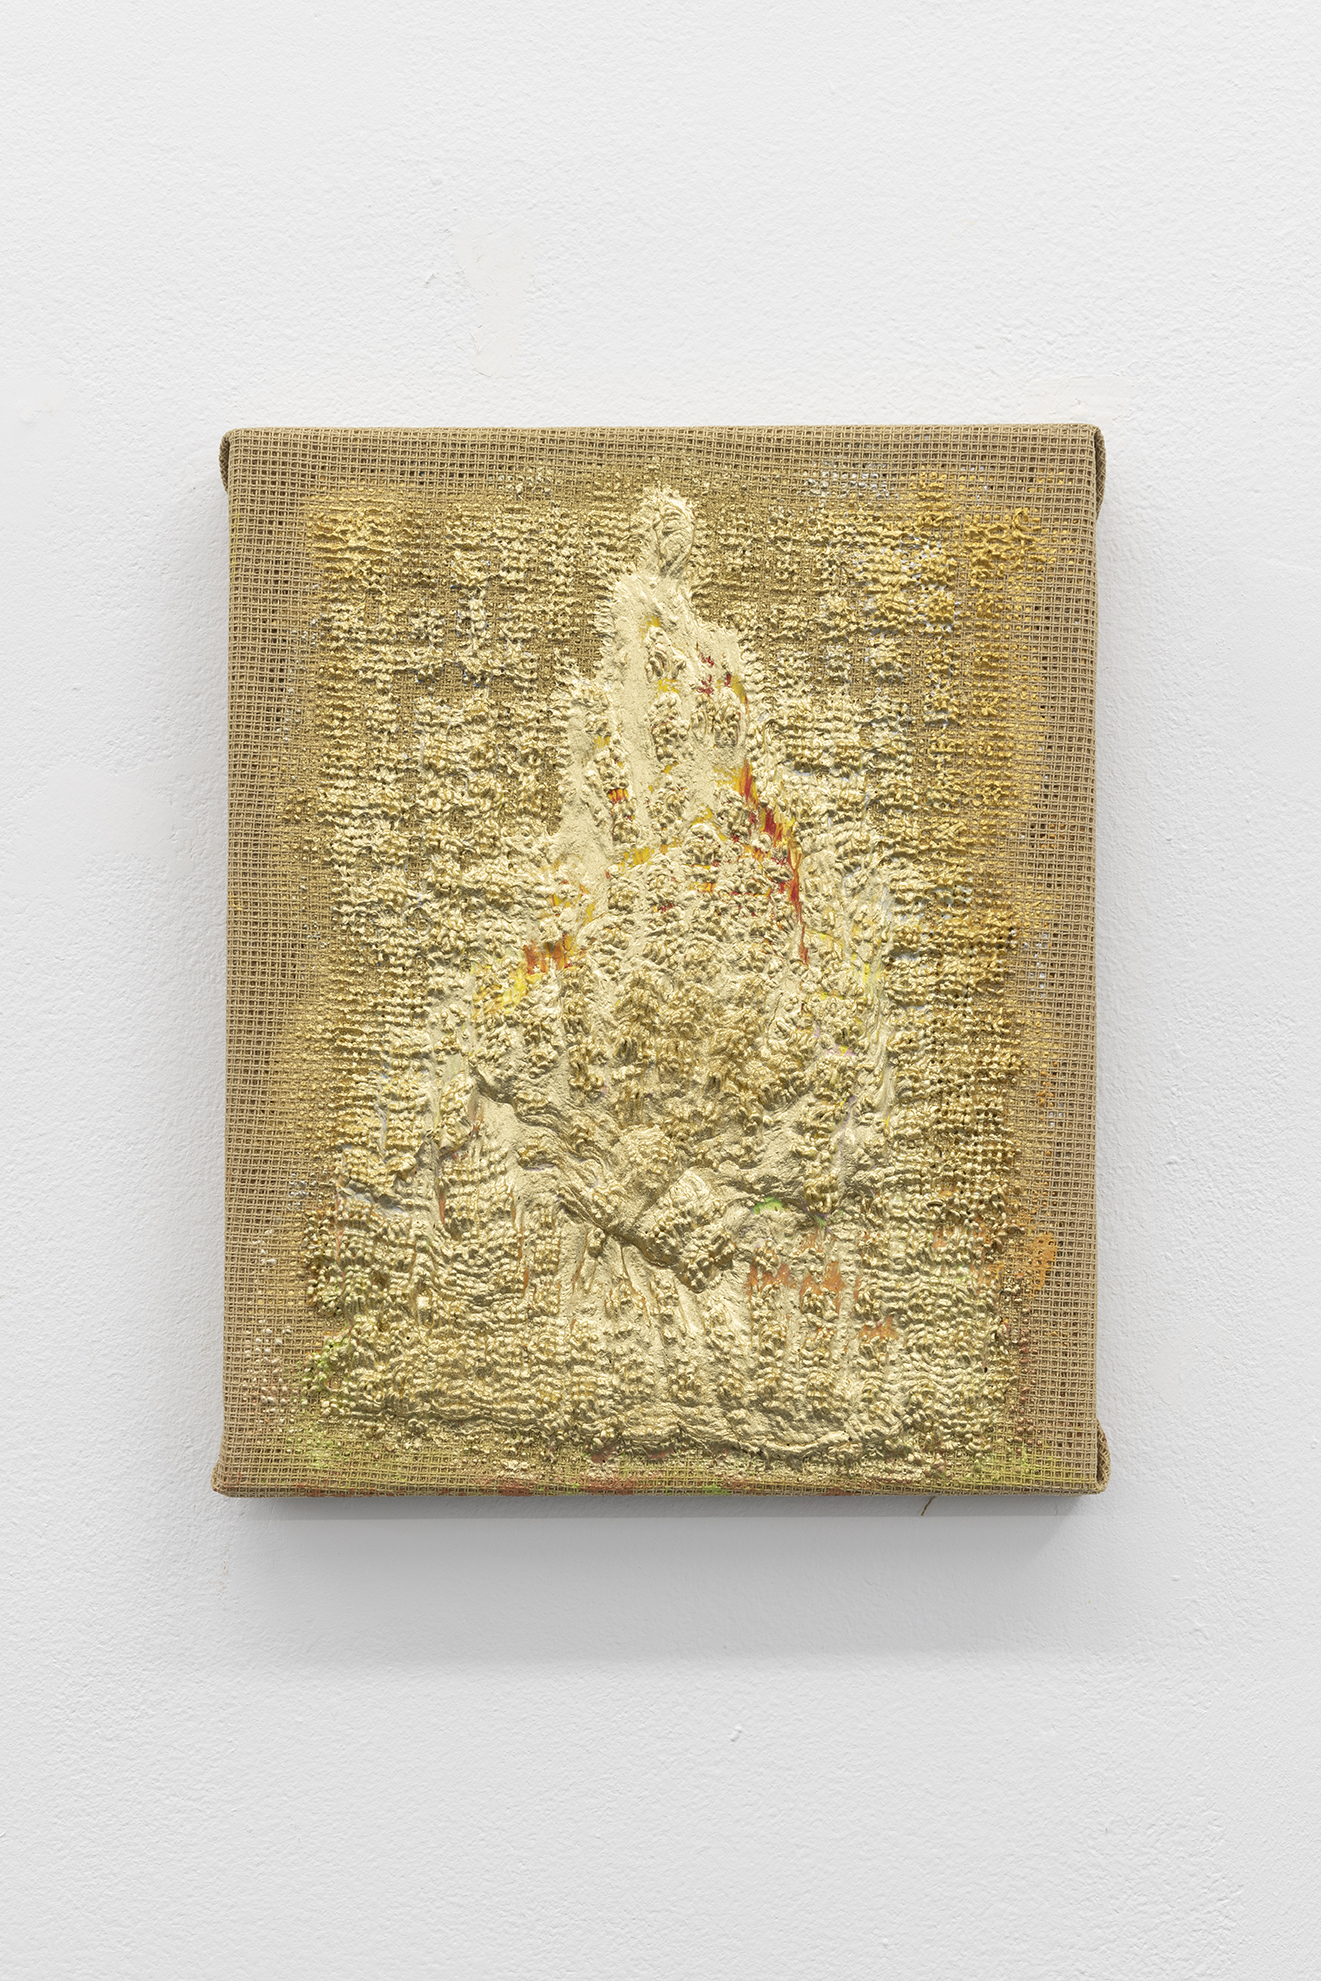 <p>Mesh (flame), oil paint, marble dust, gold pigment in needlepoint mesh, 23 x 30 cm</p>
